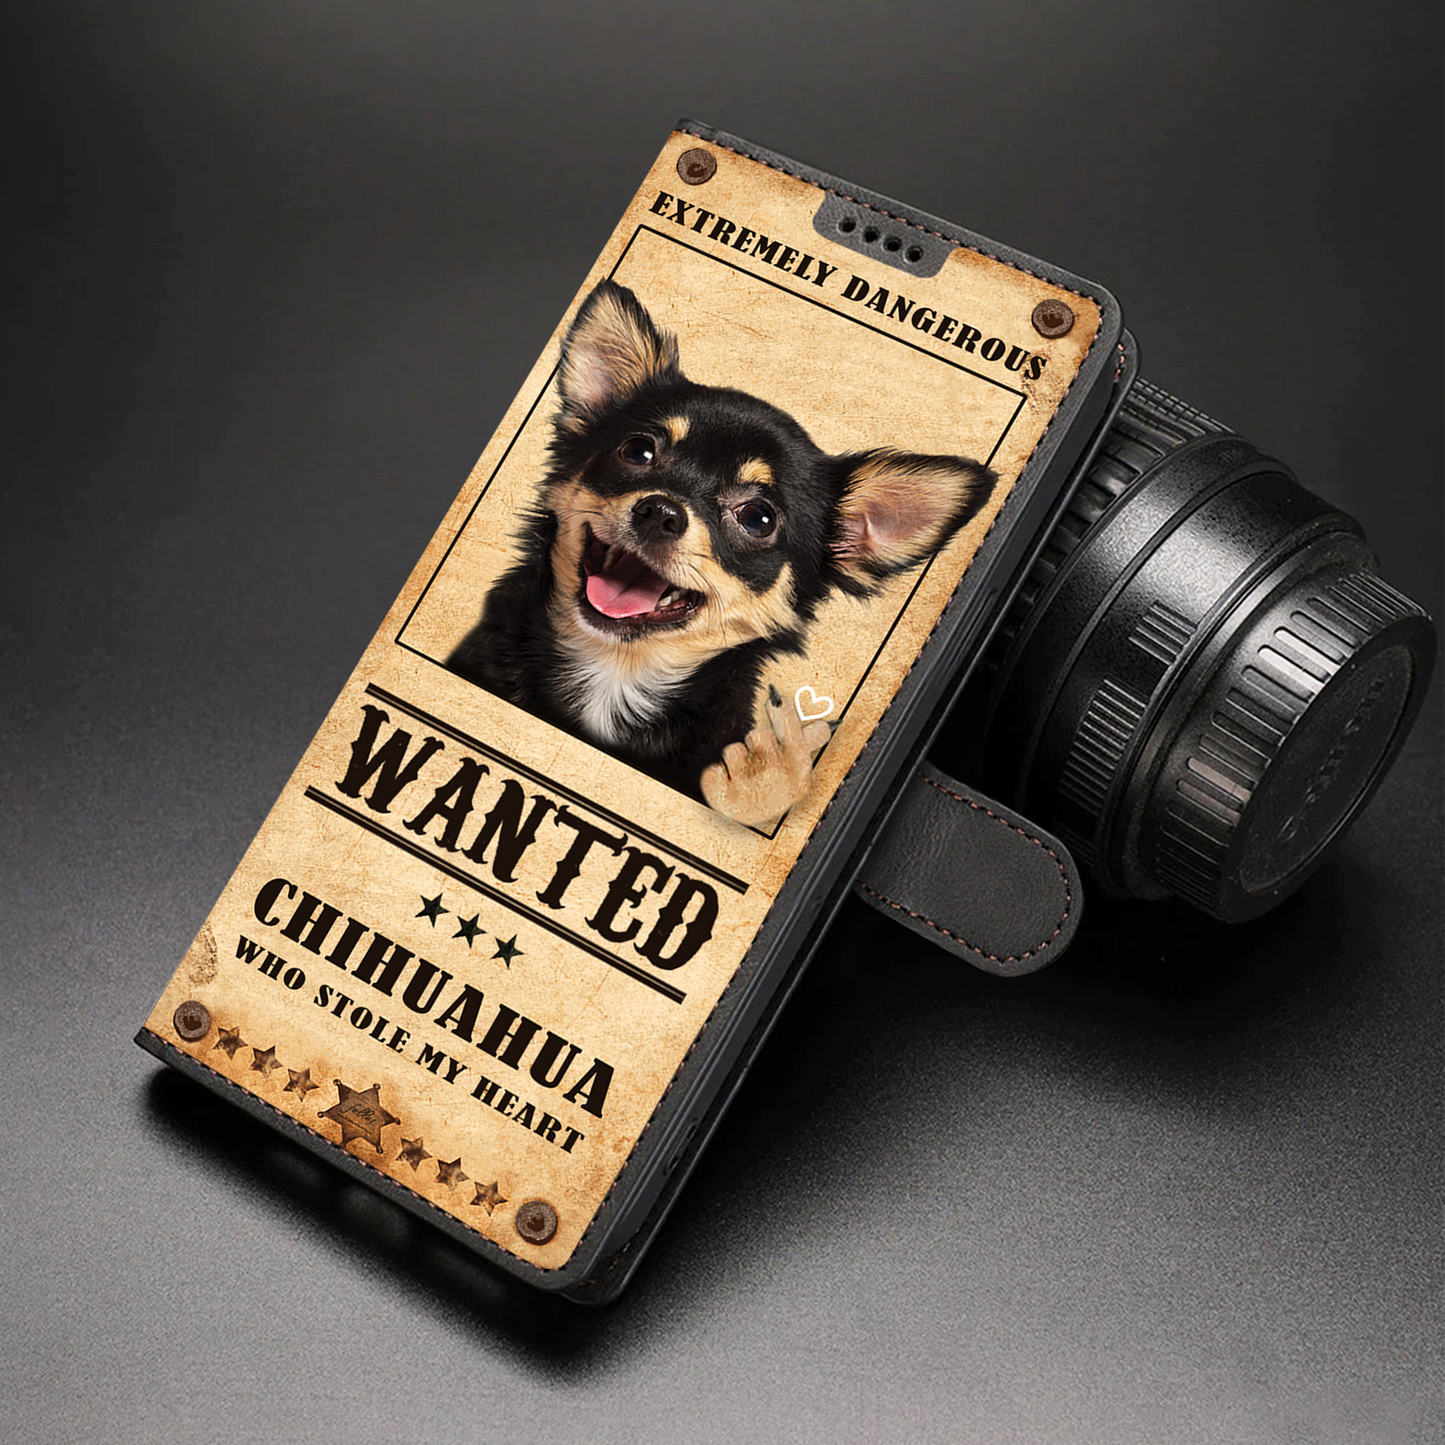 Heart Thief Chihuahua - Love Inspired Wallet Phone Case V1